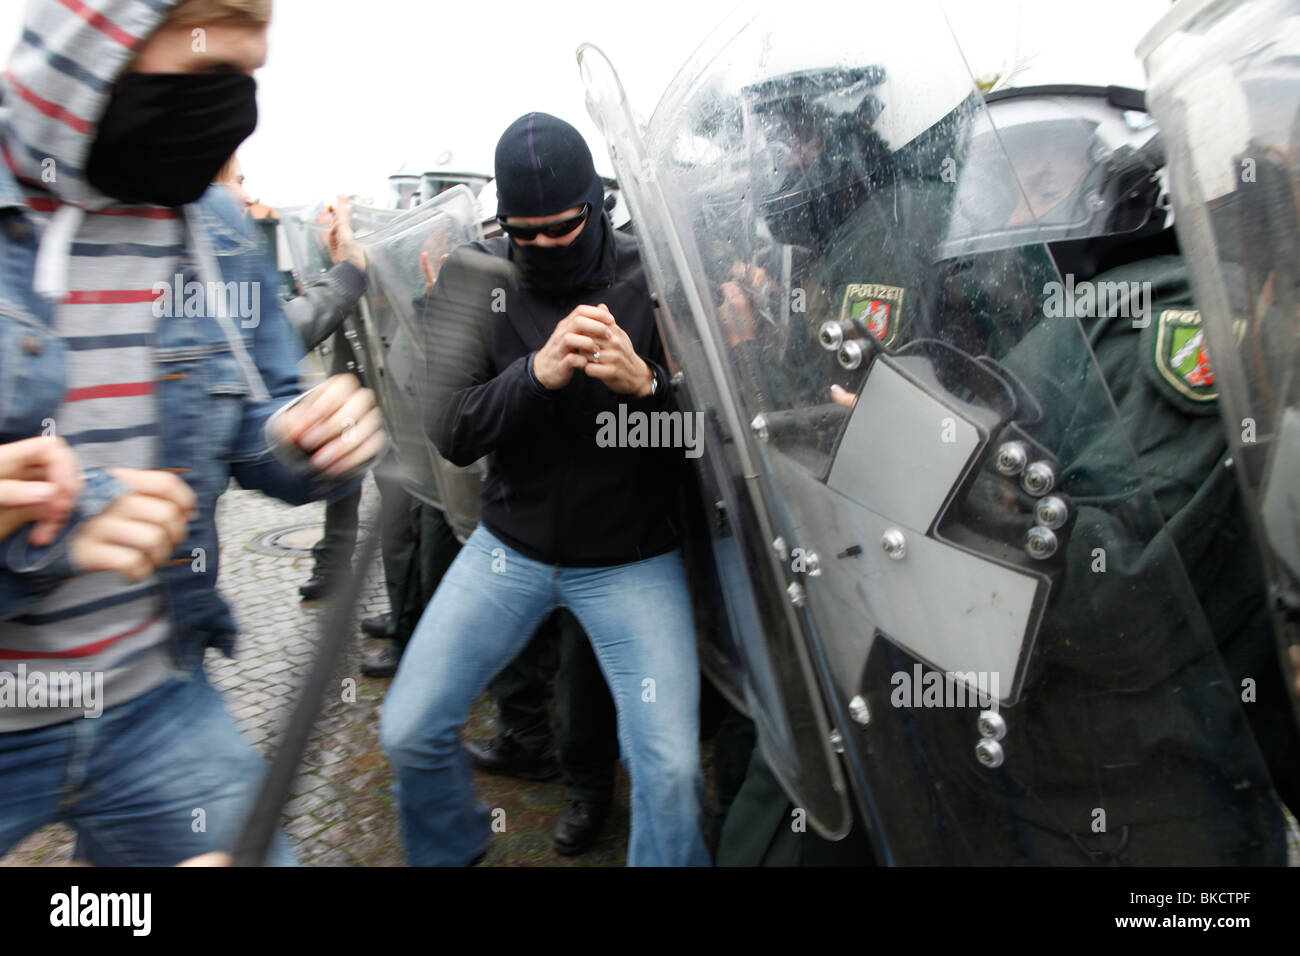 Violence against police officers. Exercise of an anti riot police unit. Violent demonstrators attacks police forces. Stock Photo